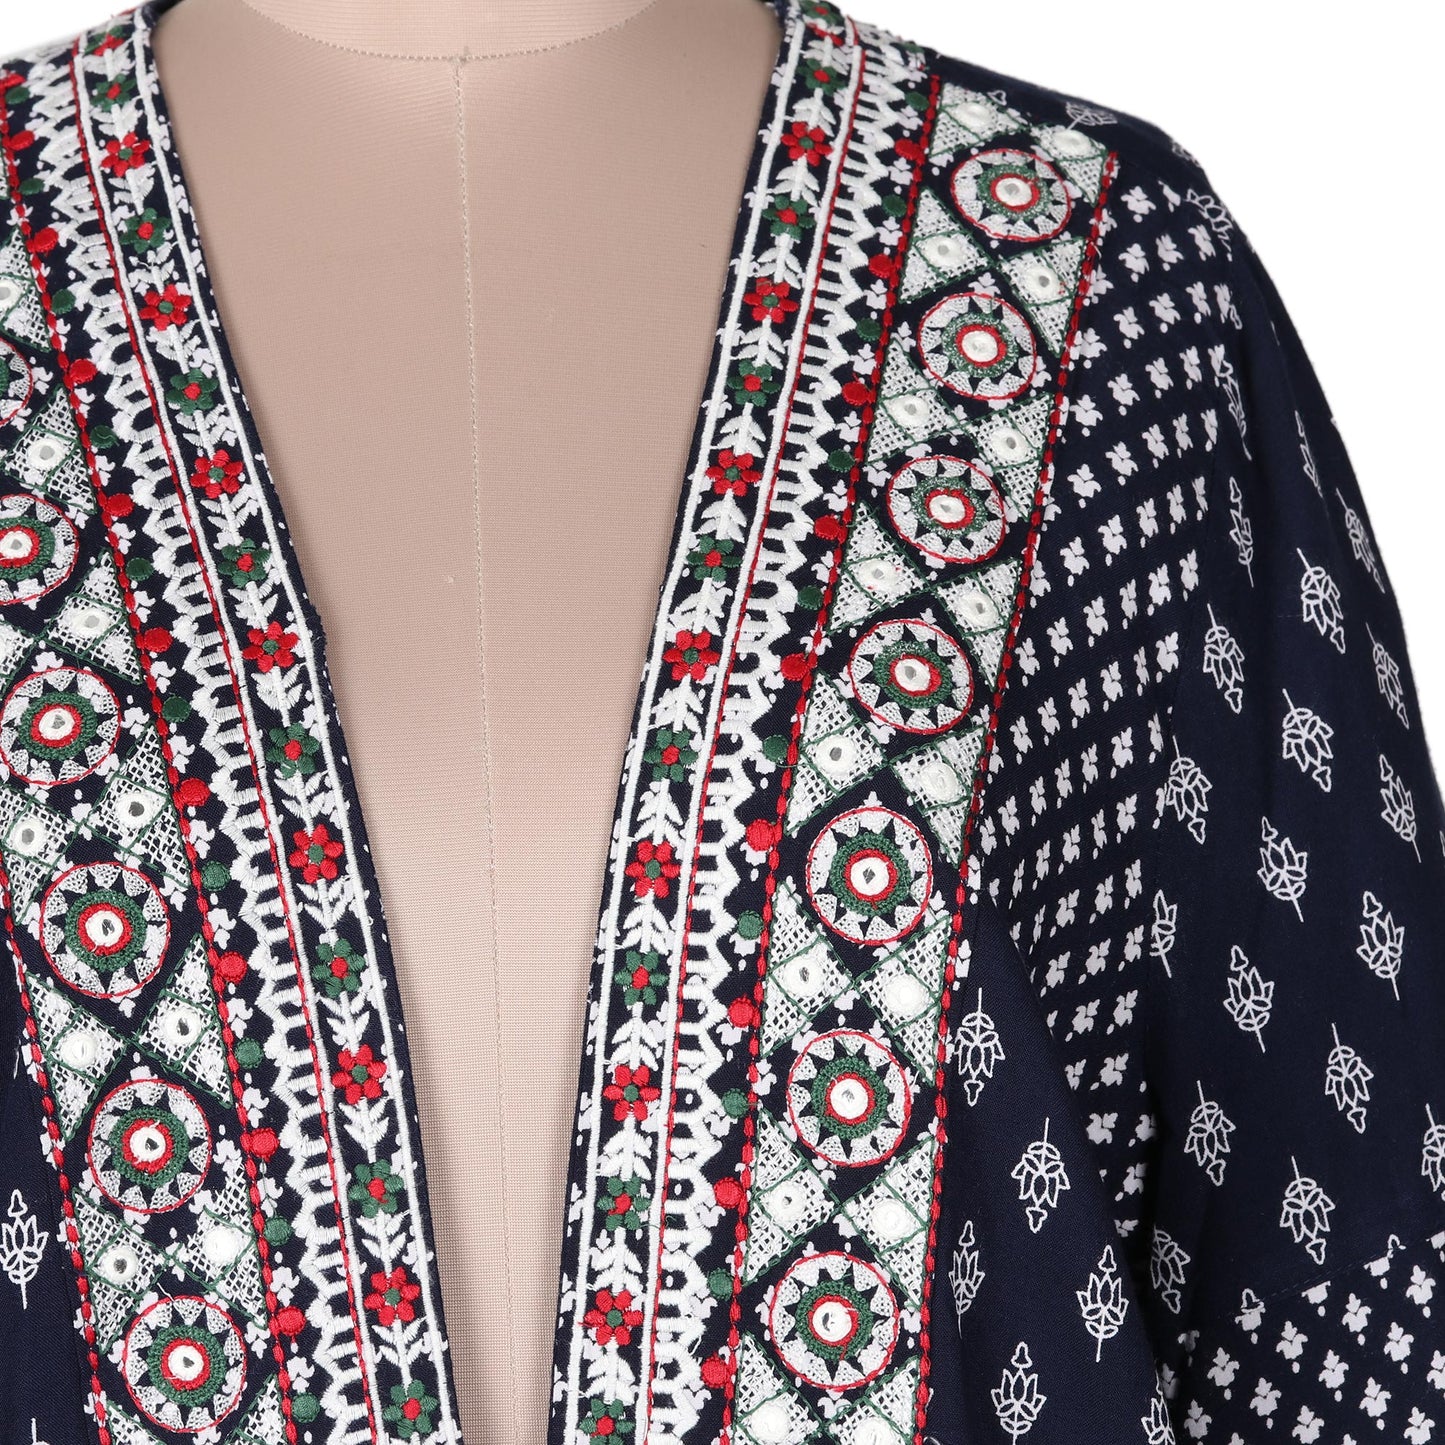 Boho Beauty Embroidered Open Jacket in Midnight Blue